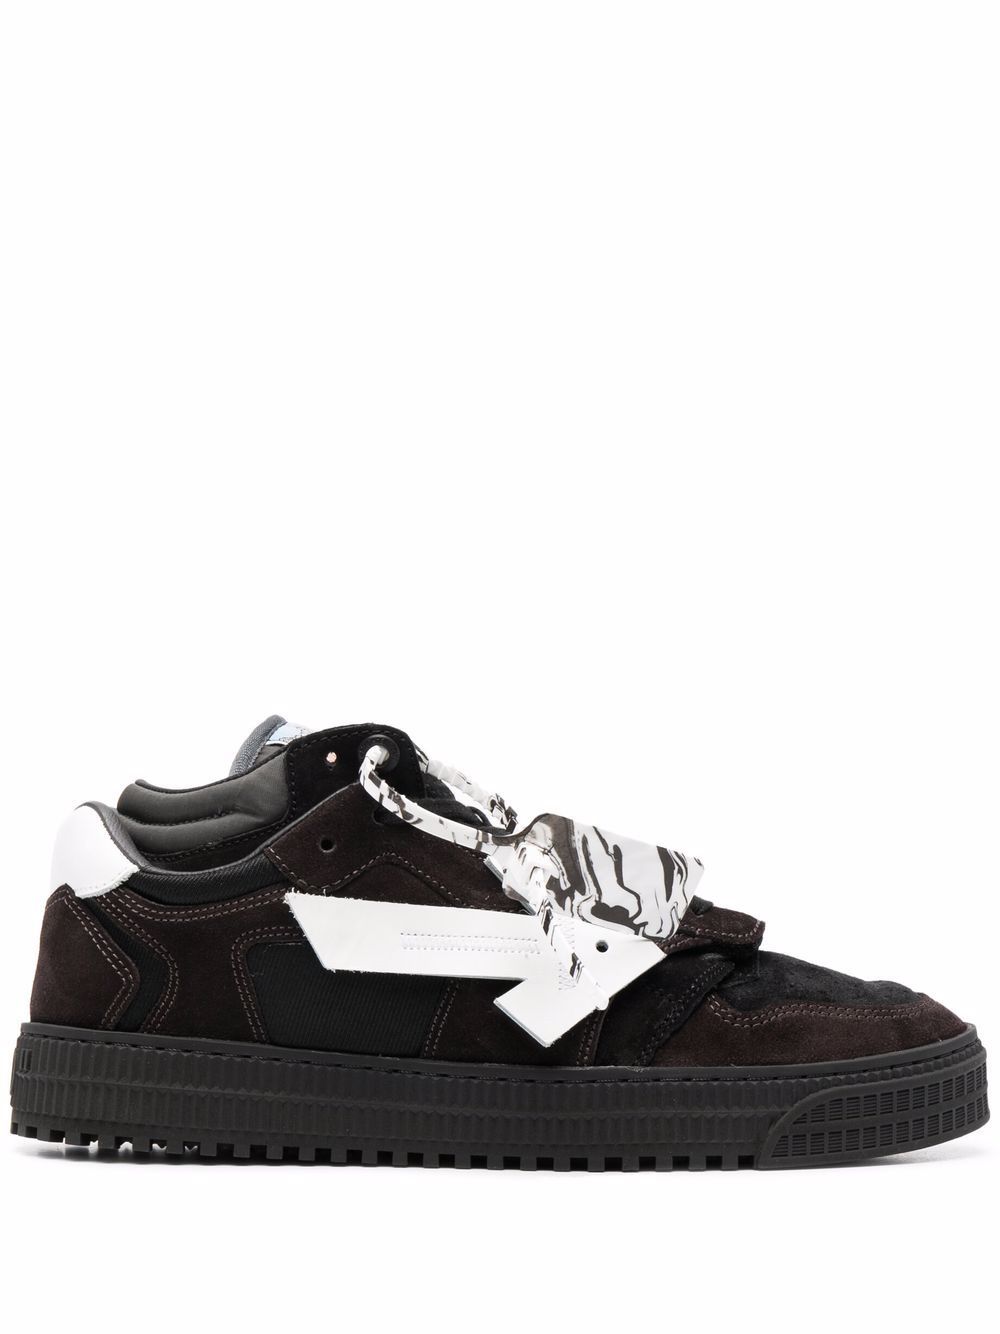 Off-White Floating Arrow Low Top Sneakers, $504 | farfetch.com | Lookastic